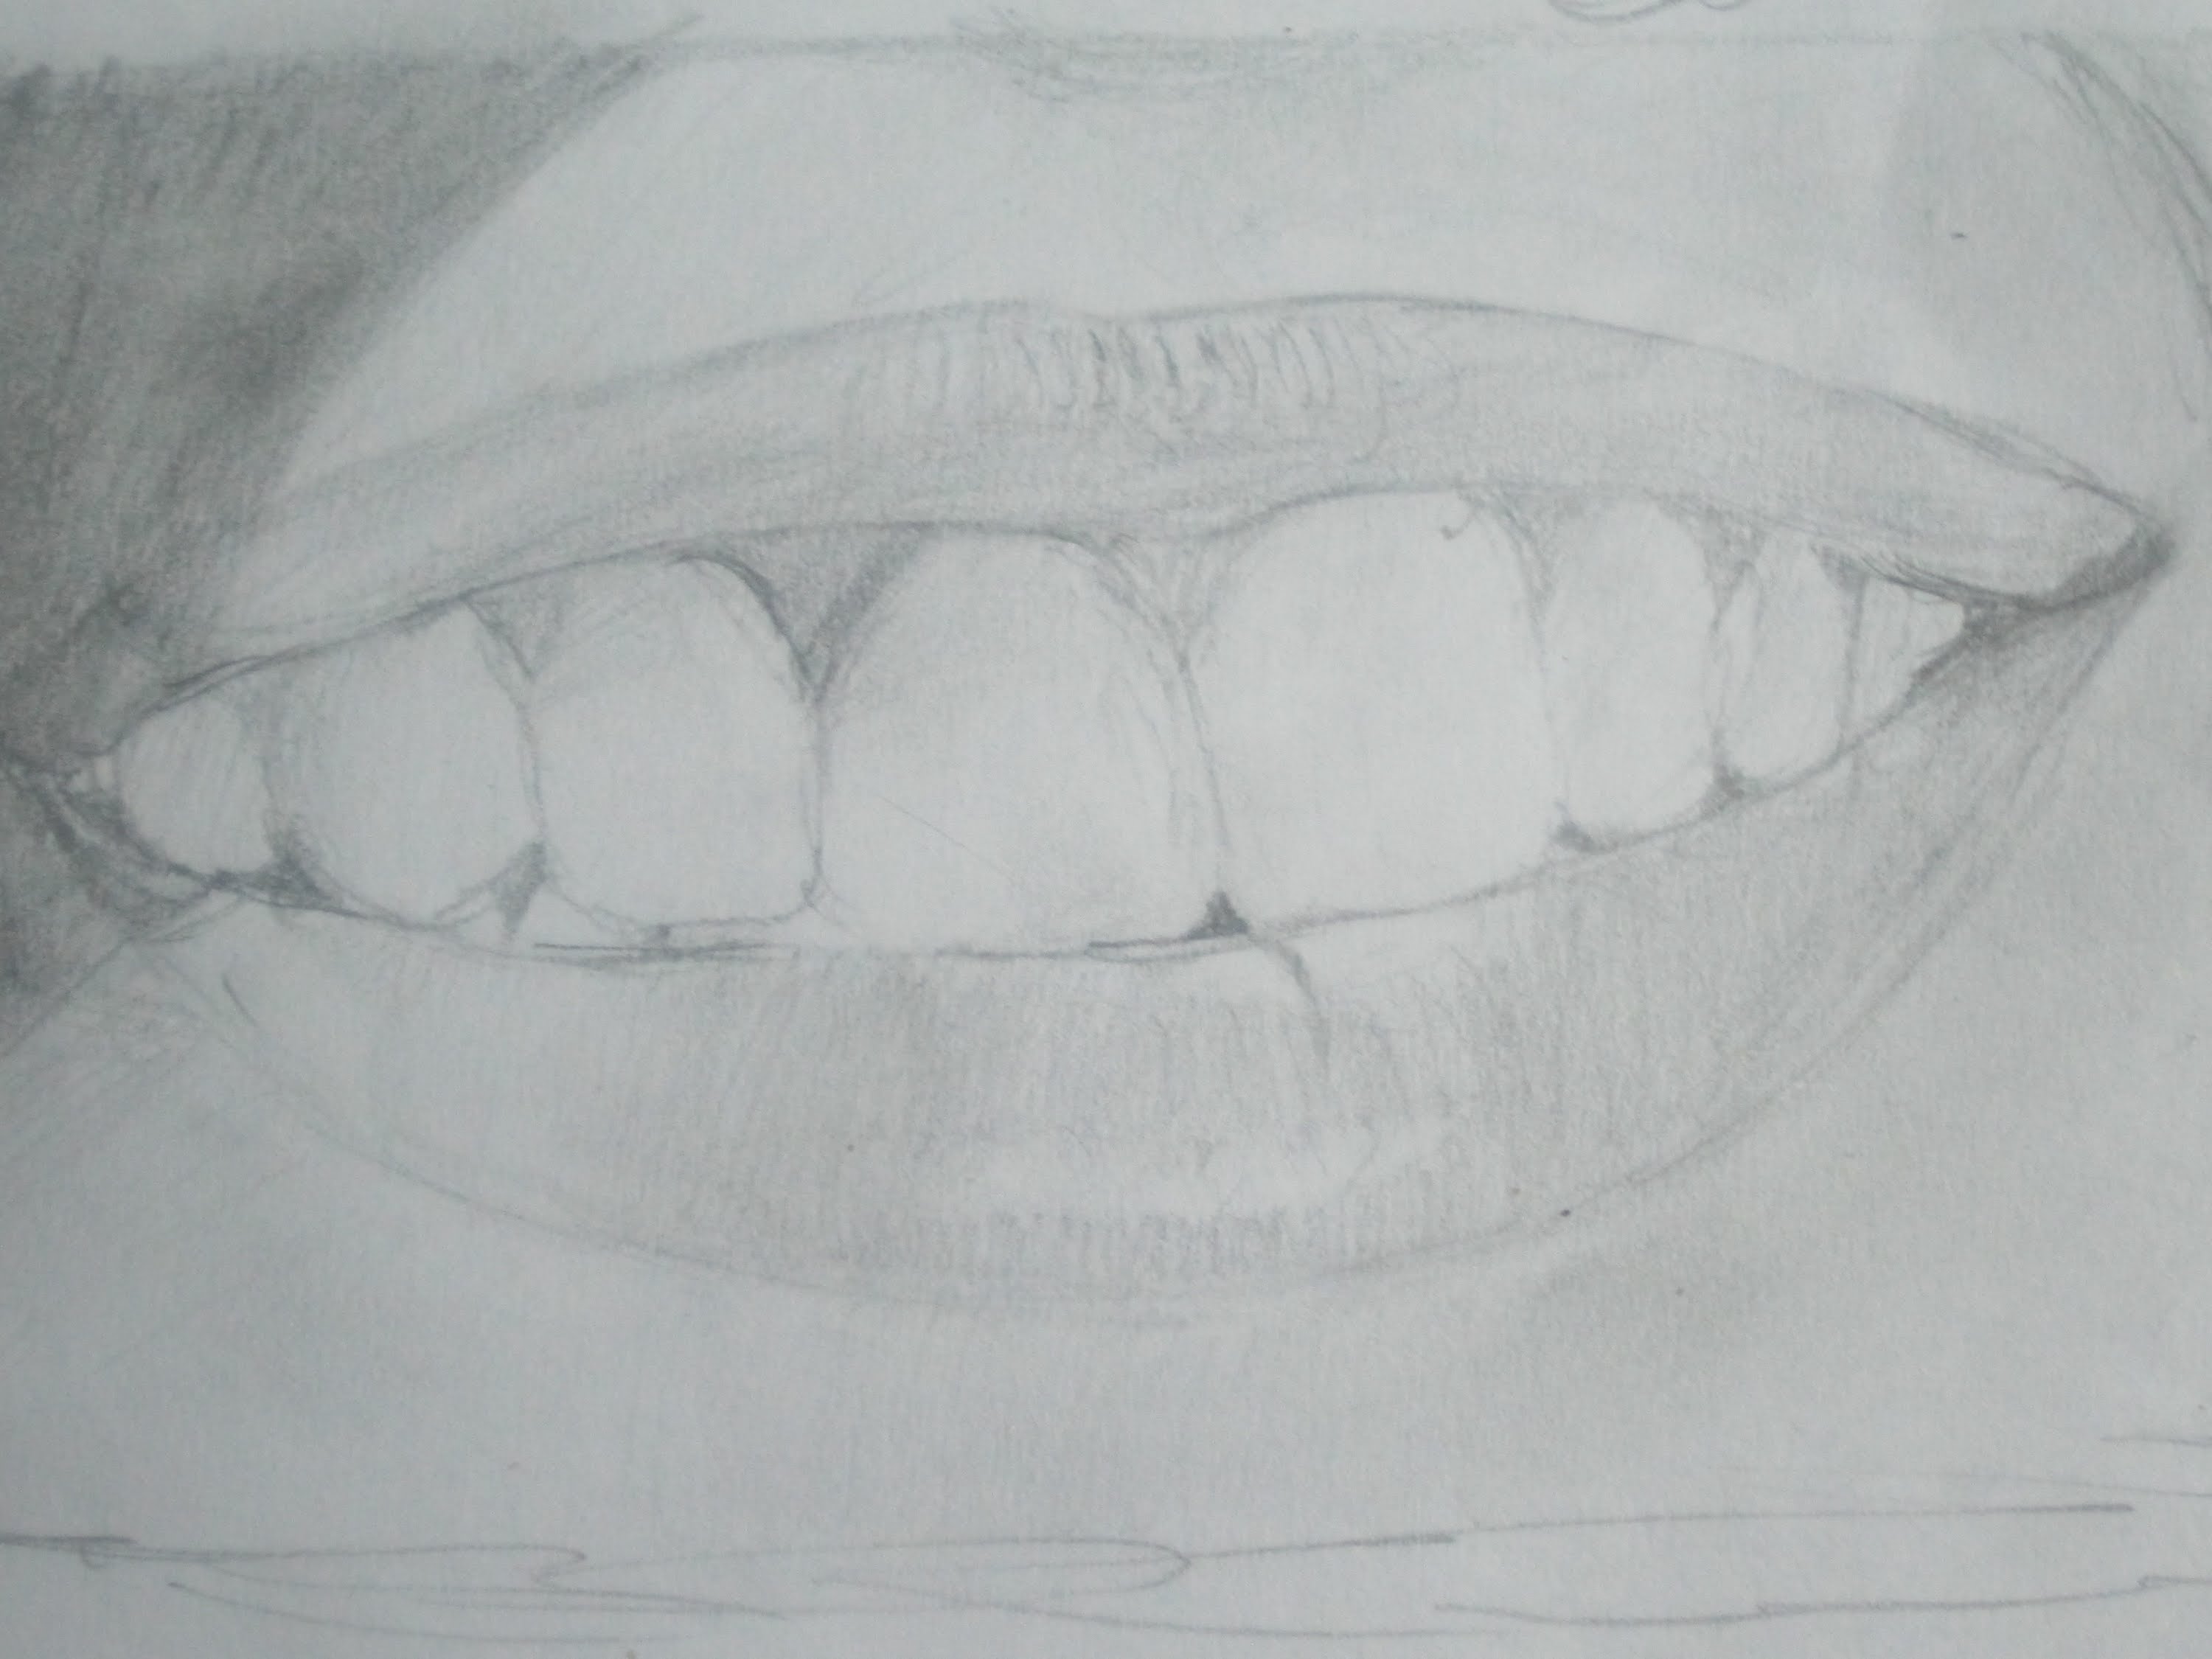 Learn how to draw: How to draw lips